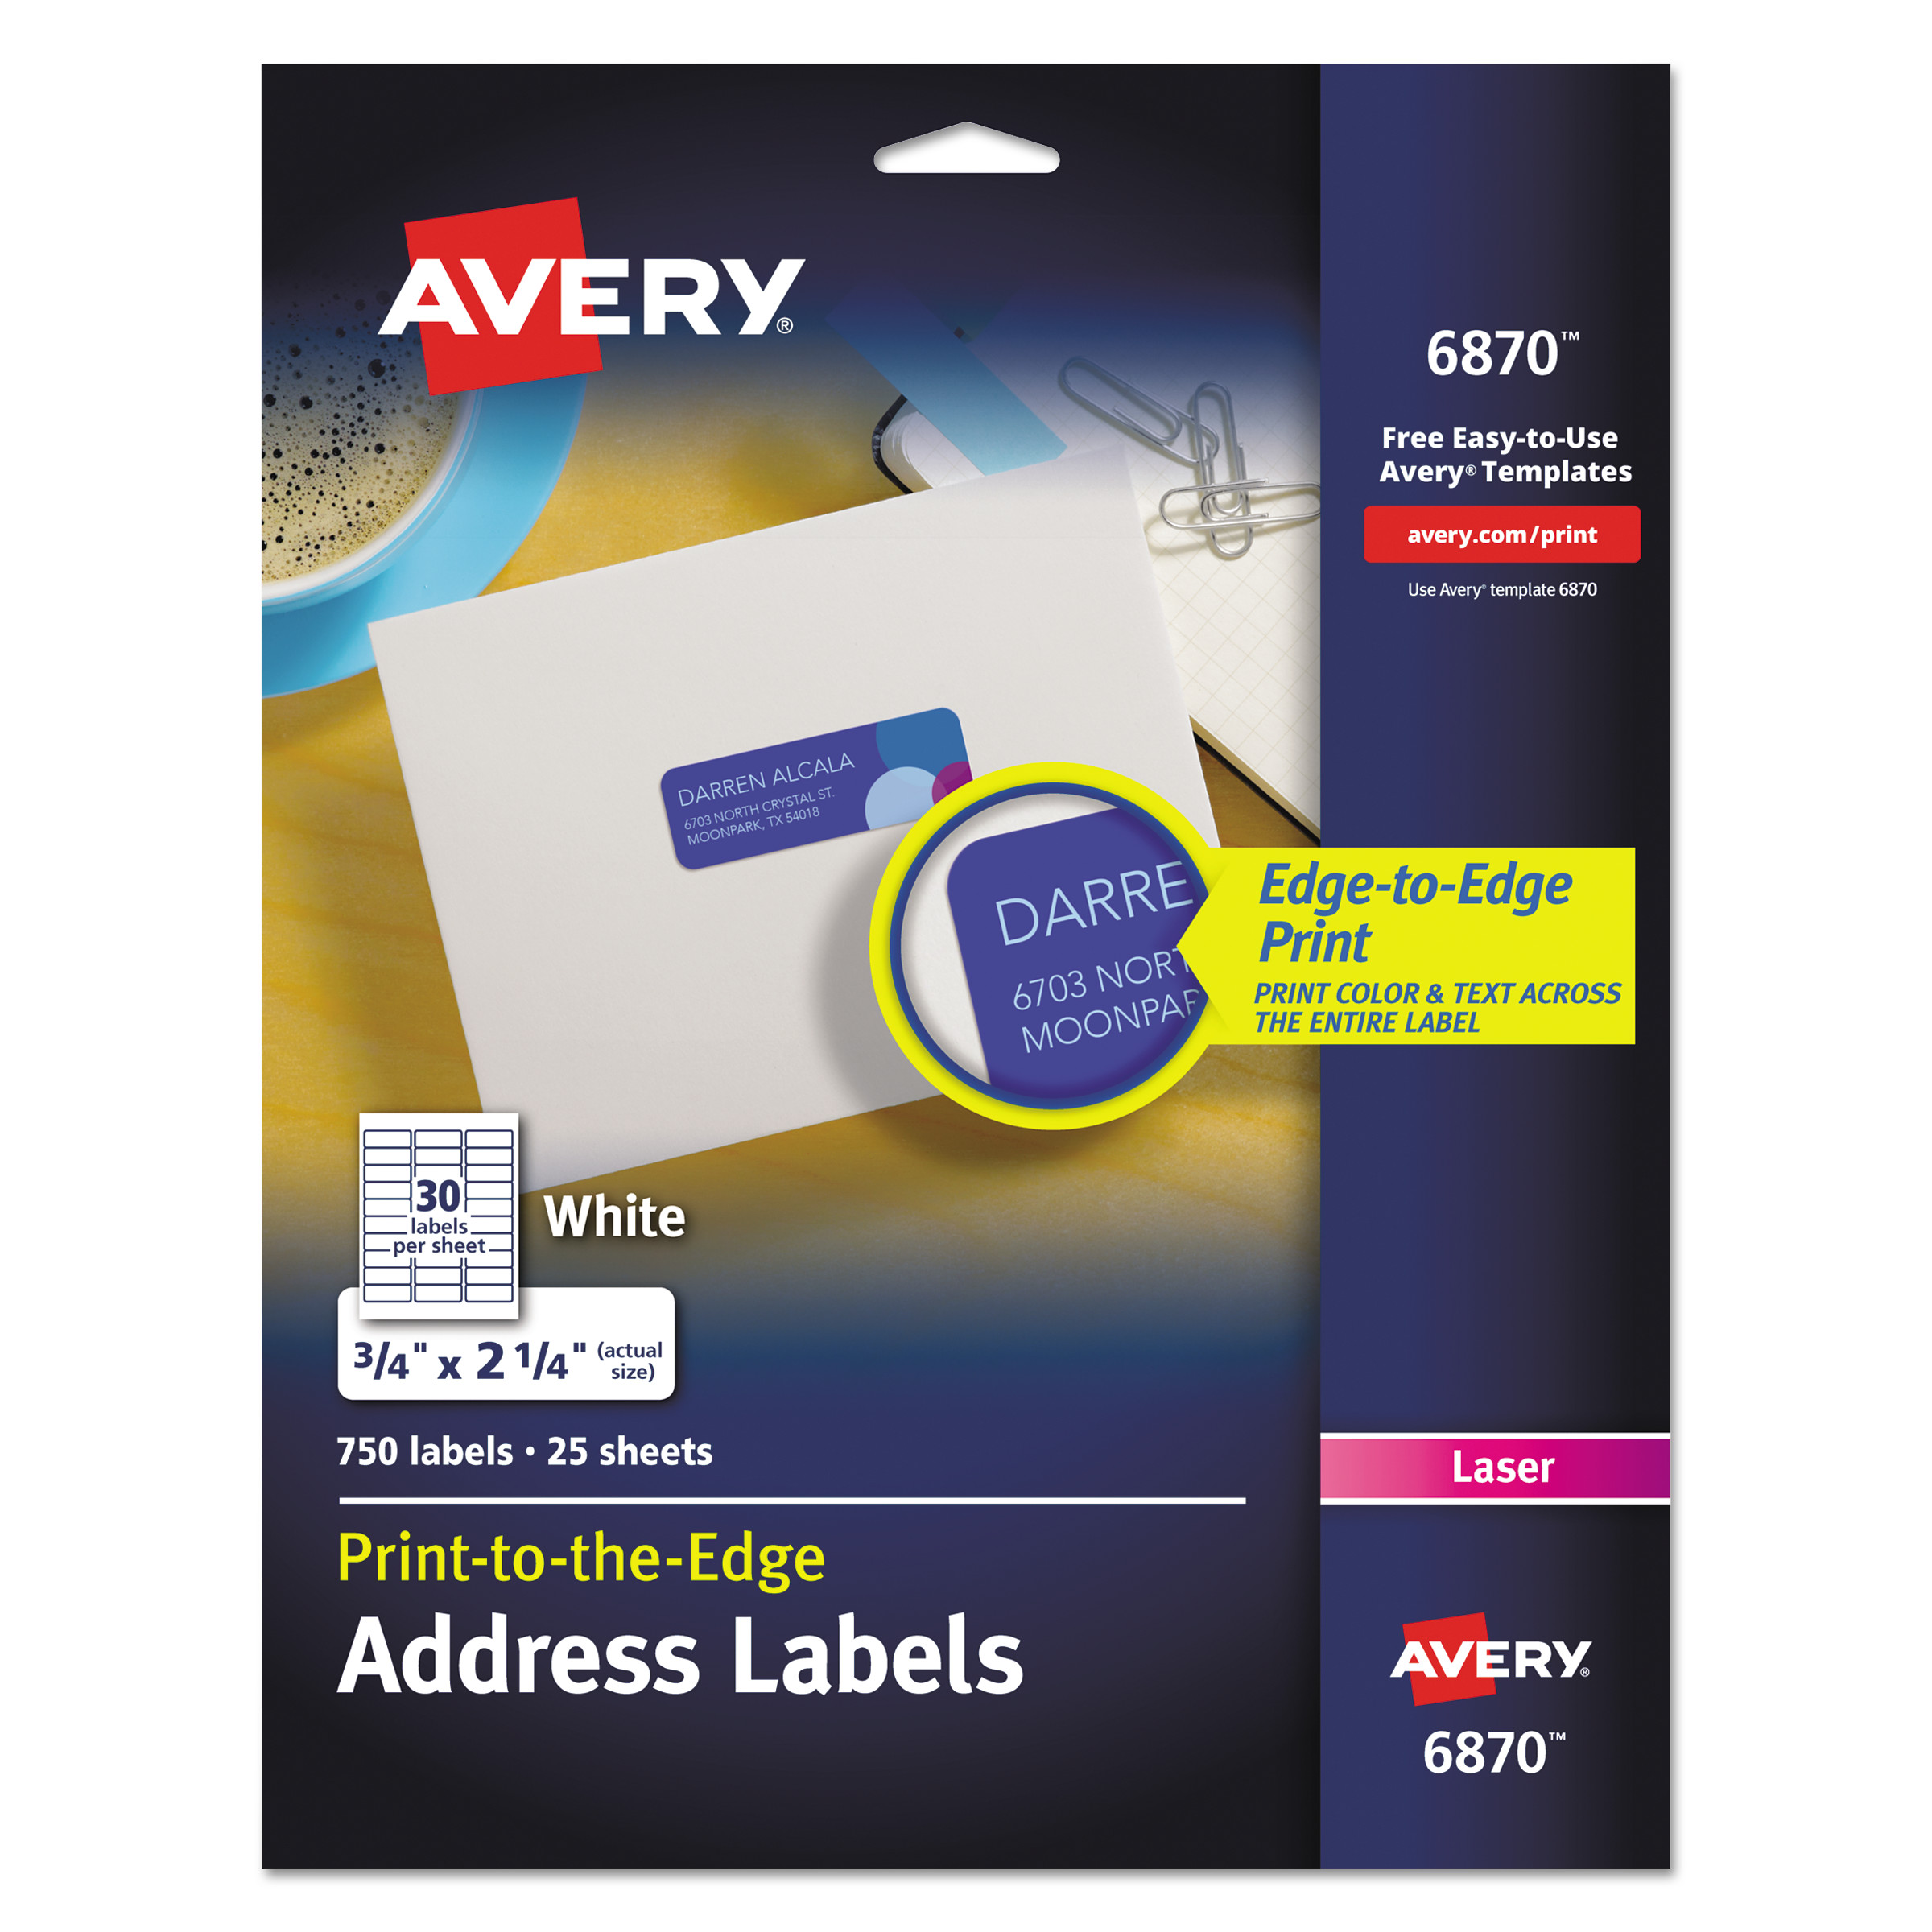  Avery 06870 Vibrant Laser Color-Print Labels with Sure Feed, 3/4 x 2 1/4, White, 750/PK (AVE6870) 